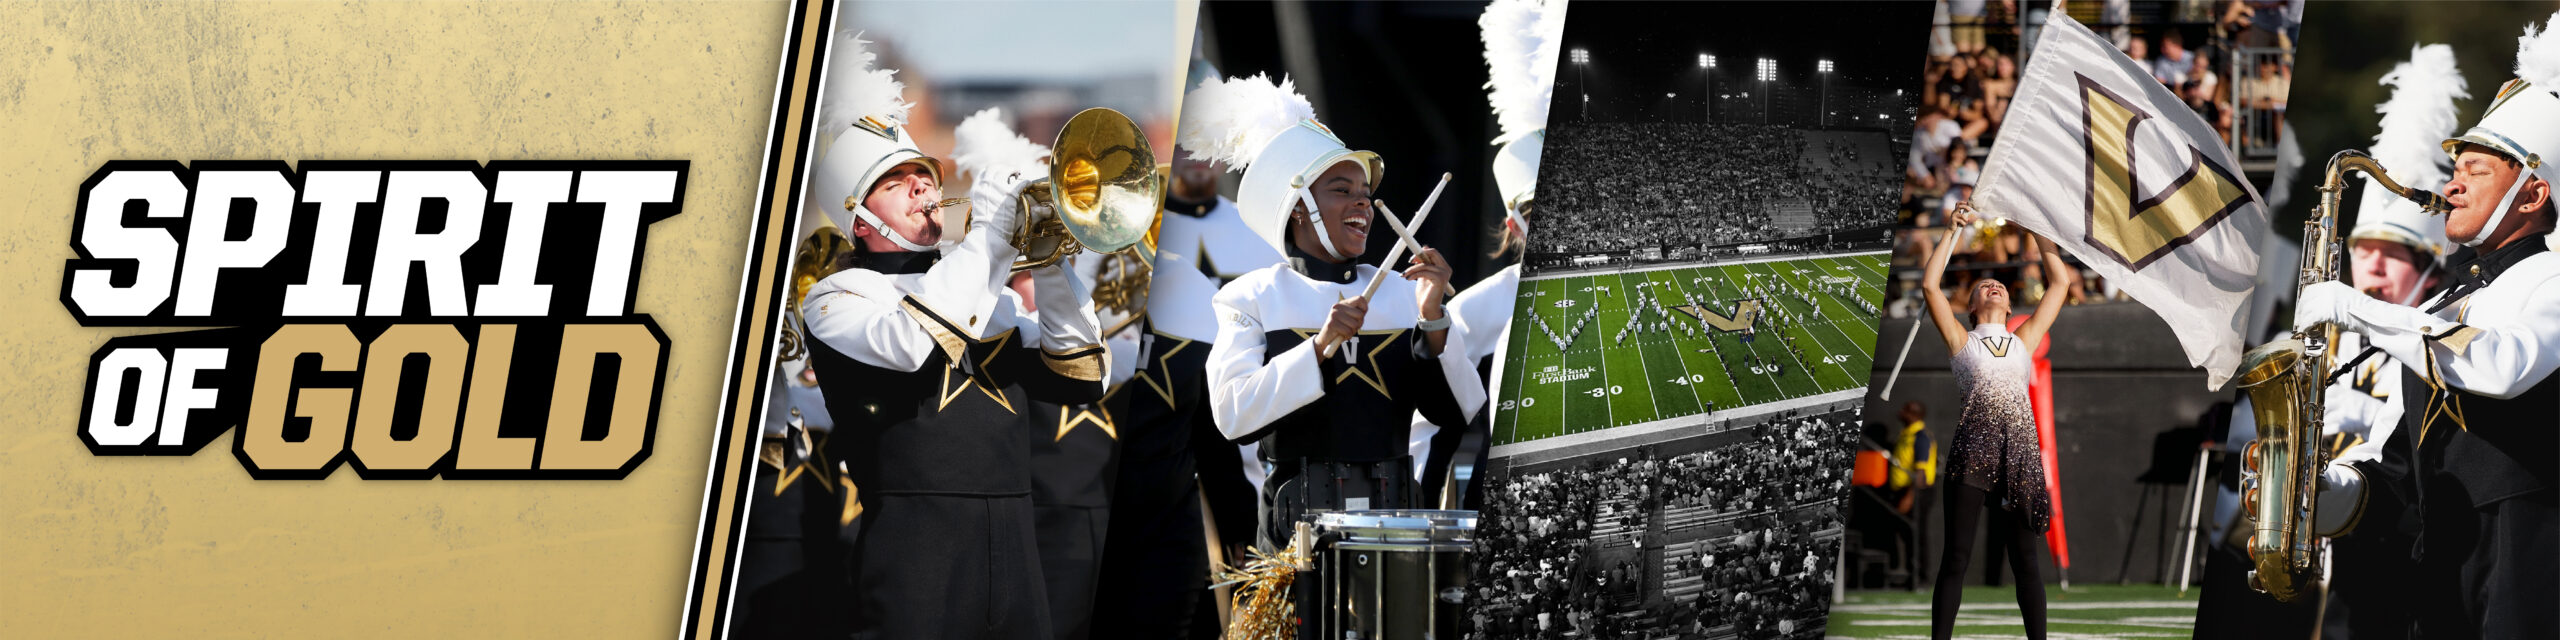 The Spirit of Gold Marching Band